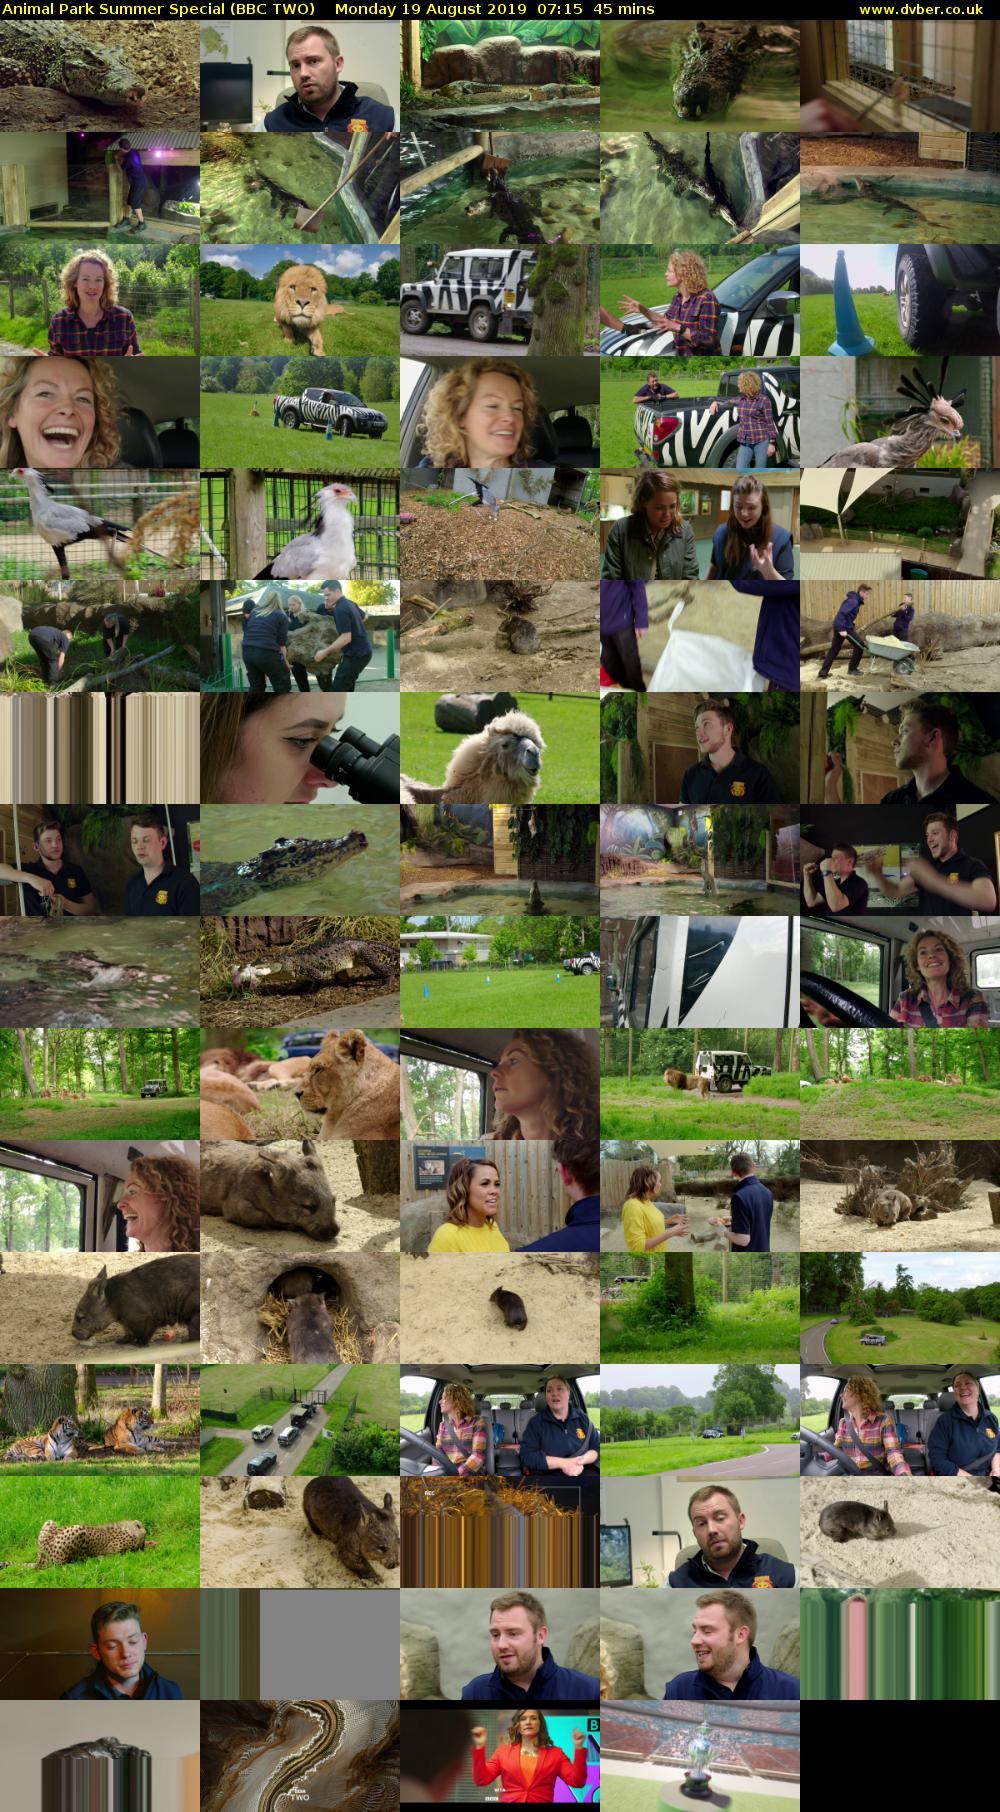 Animal Park Summer Special (BBC TWO) Monday 19 August 2019 07:15 - 08:00